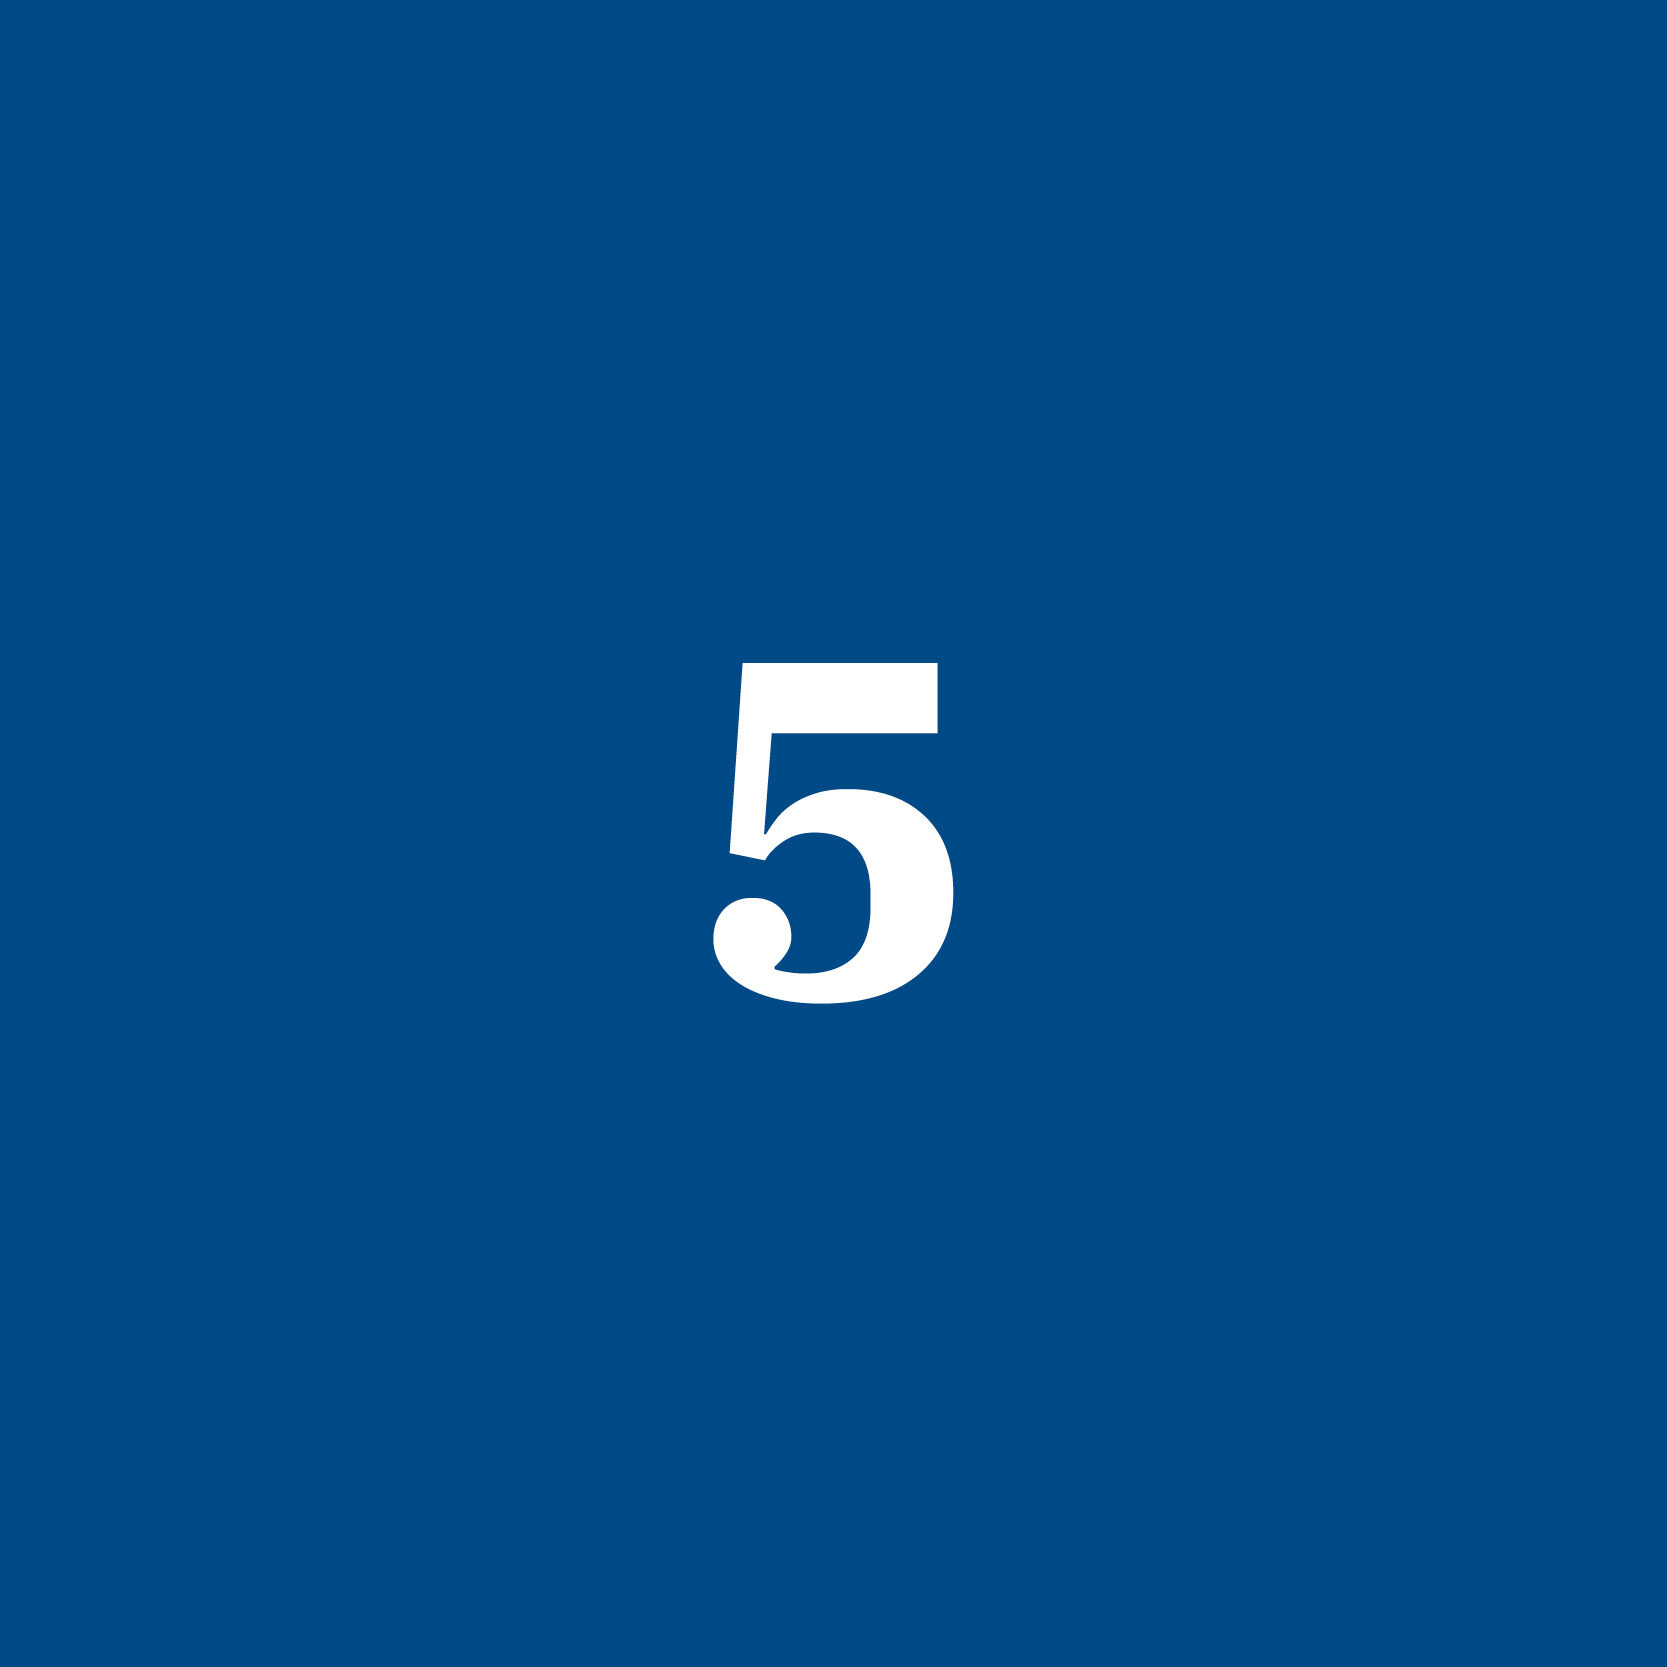 Blue background with a white number 5